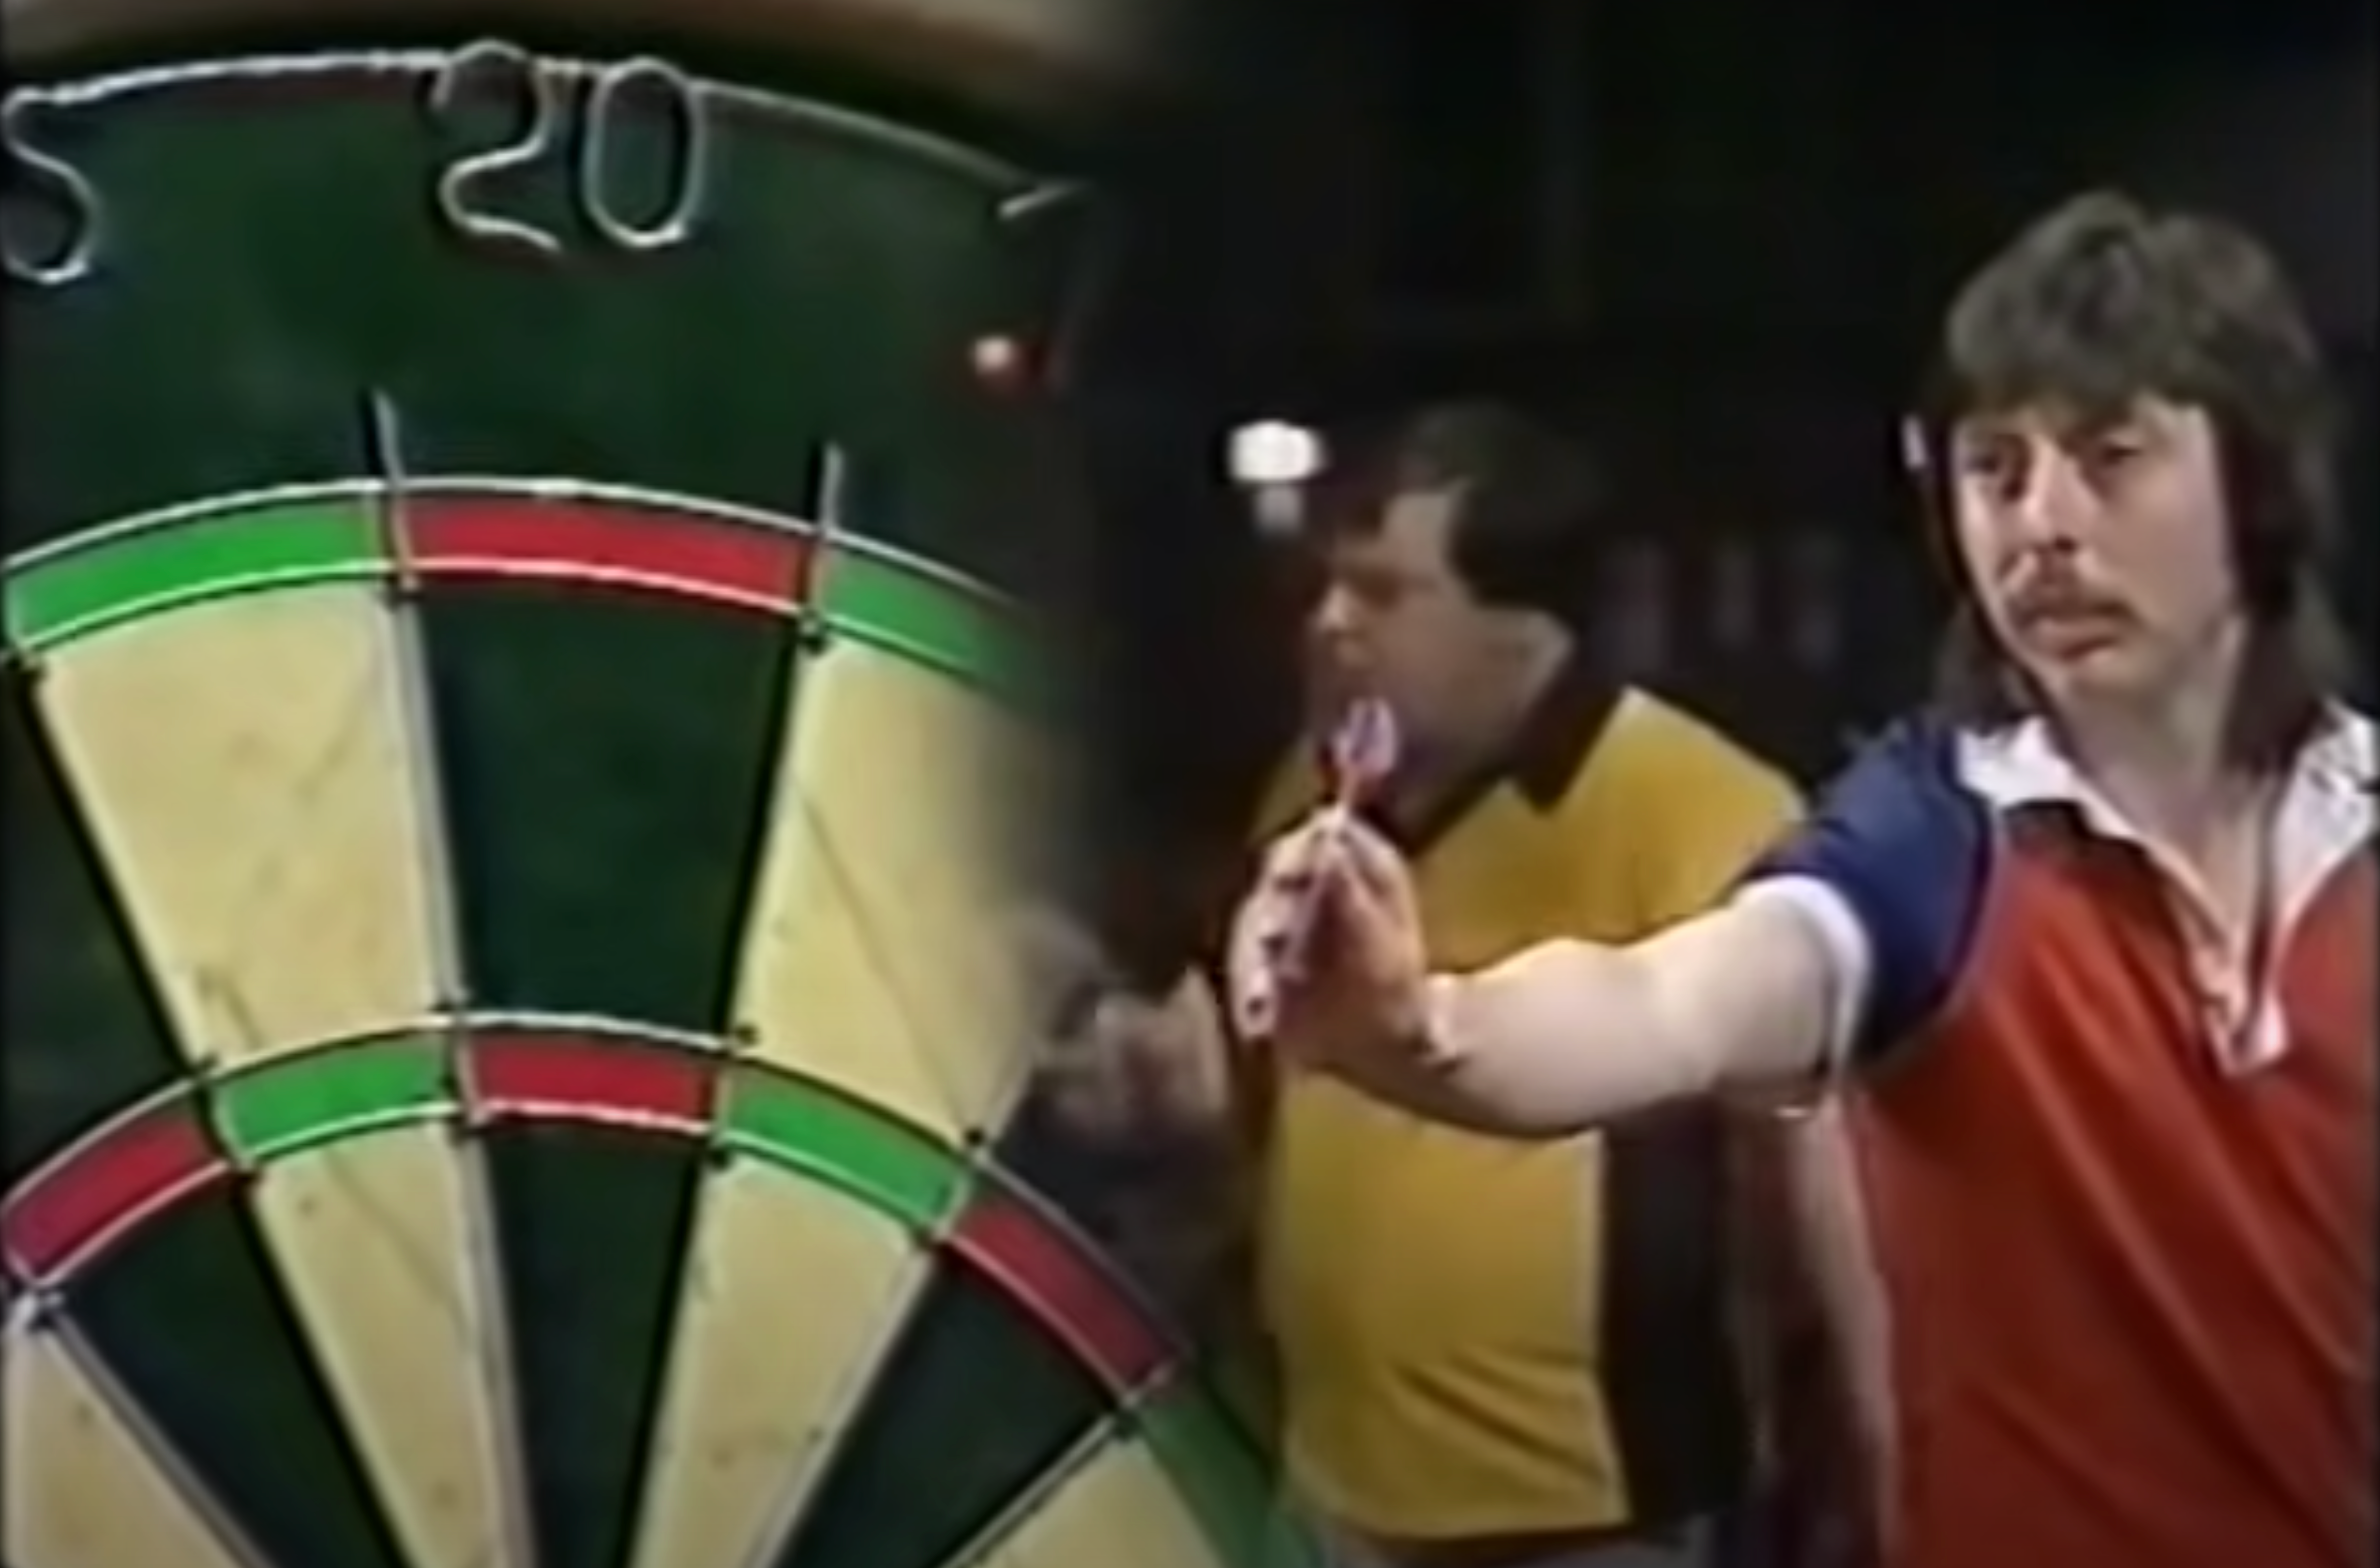 World's slowest darts throw: Terry Down's technique was excruciating to watch